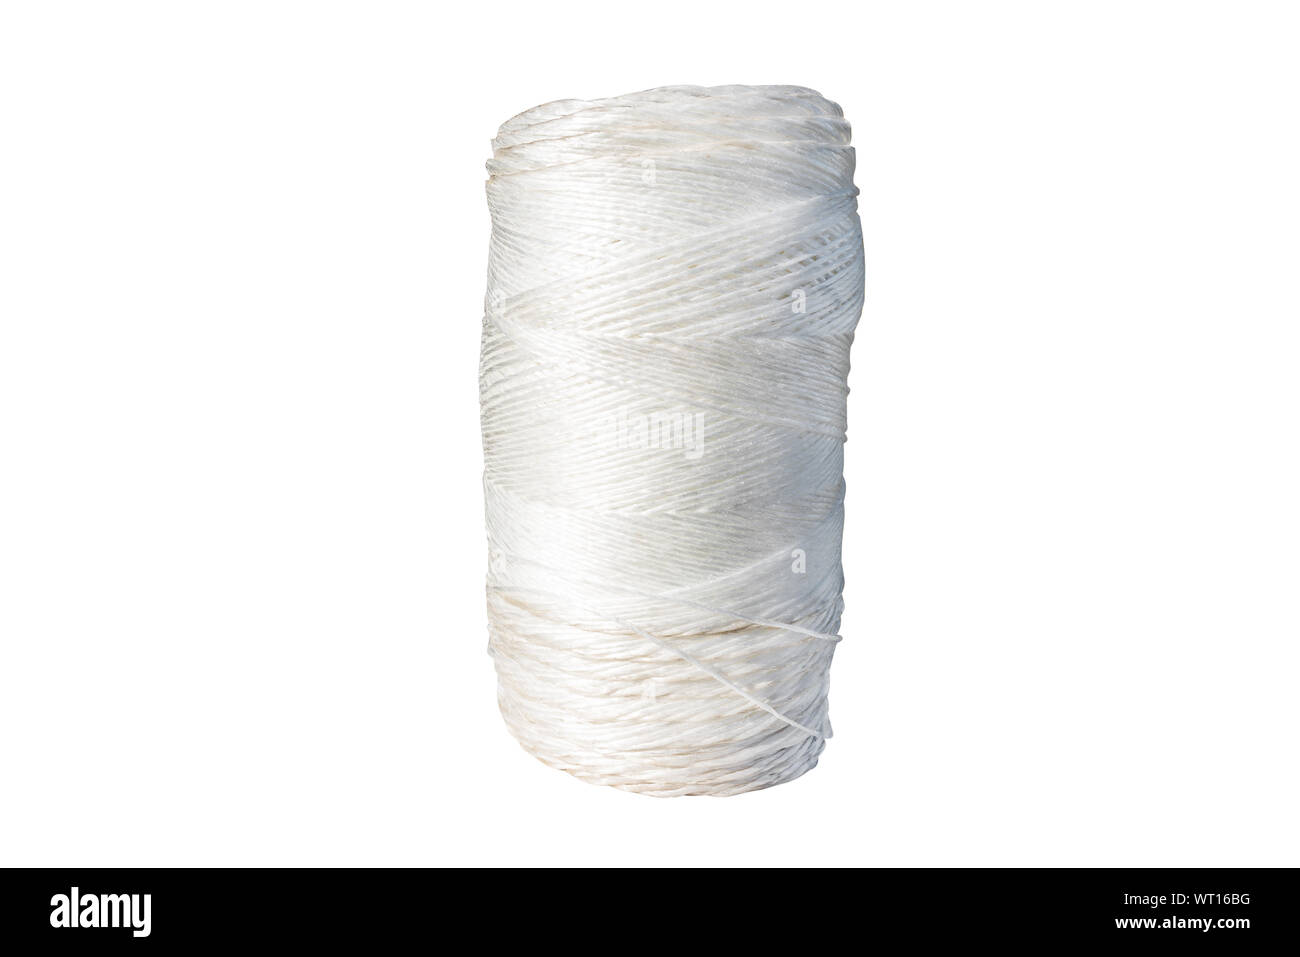 https://c8.alamy.com/comp/WT16BG/polypropylene-twine-used-in-agriculture-wound-up-on-a-roll-isolated-on-a-white-background-with-a-clipping-path-WT16BG.jpg